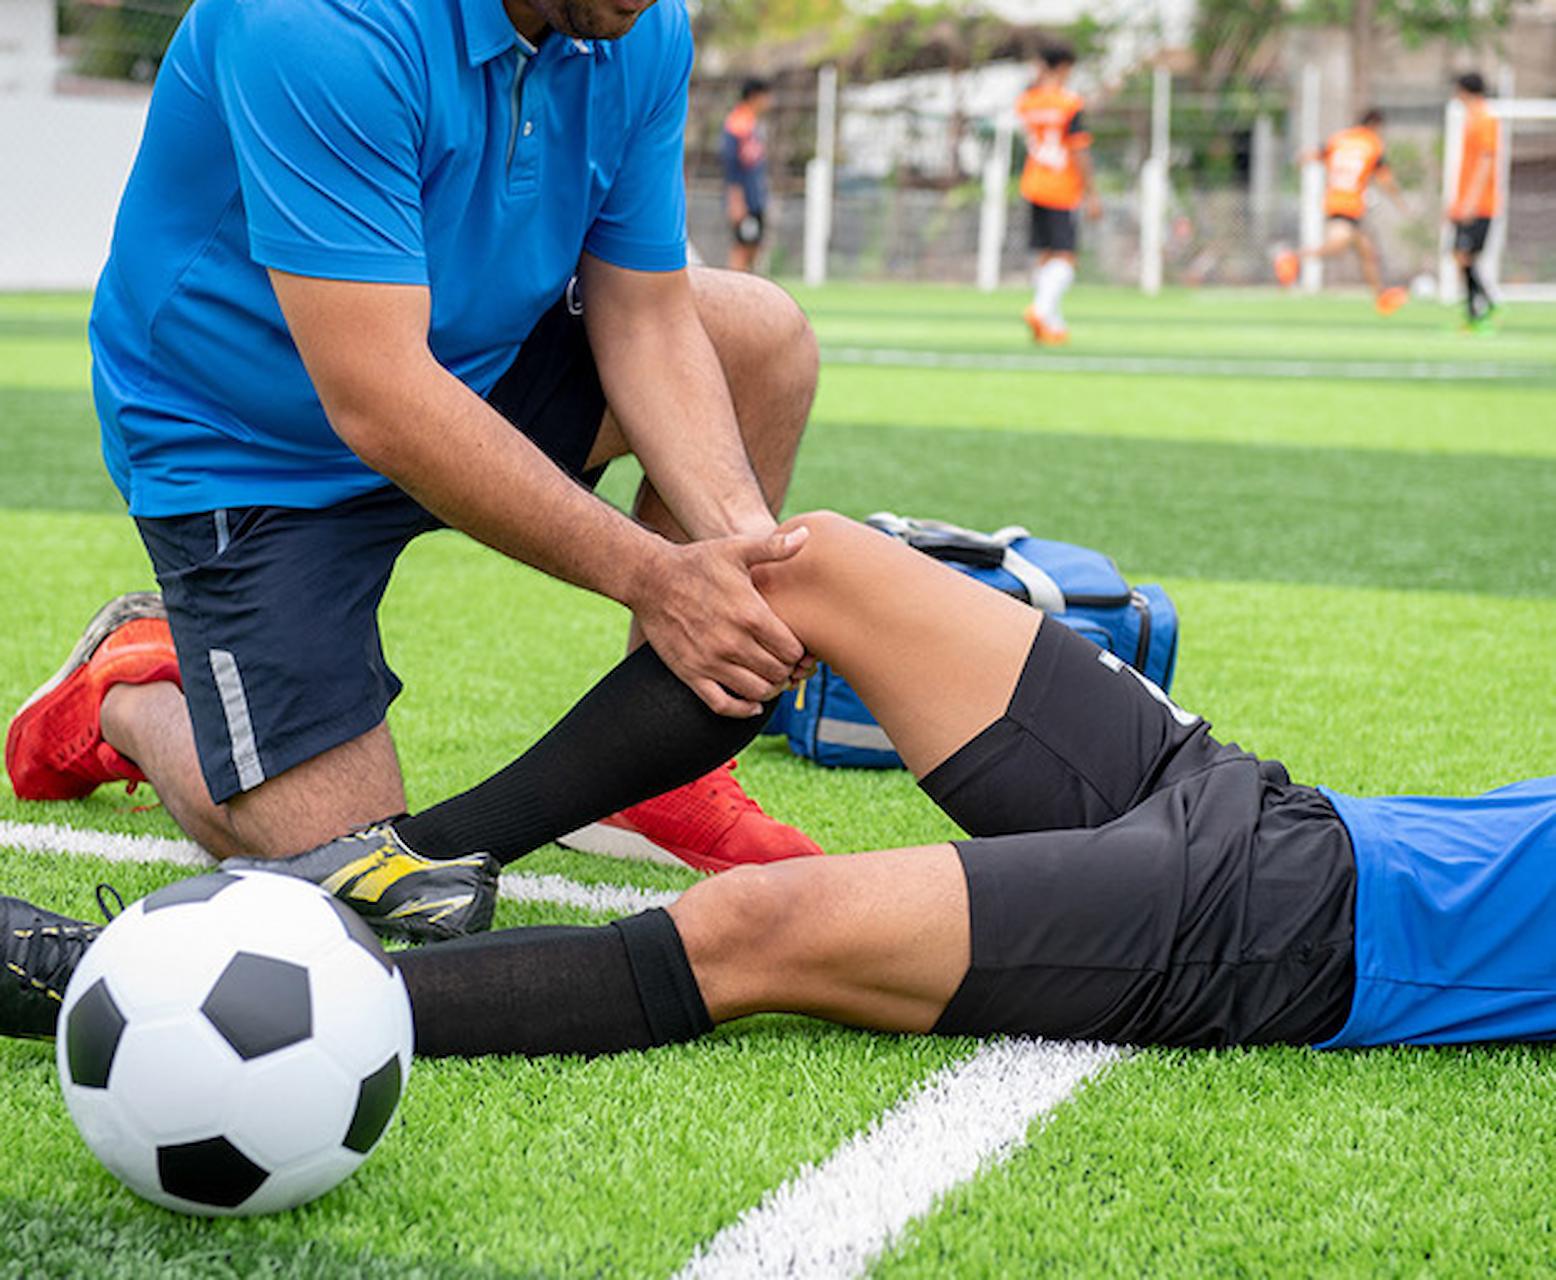 8 Preventive Tips The Young Athletes Must Remember